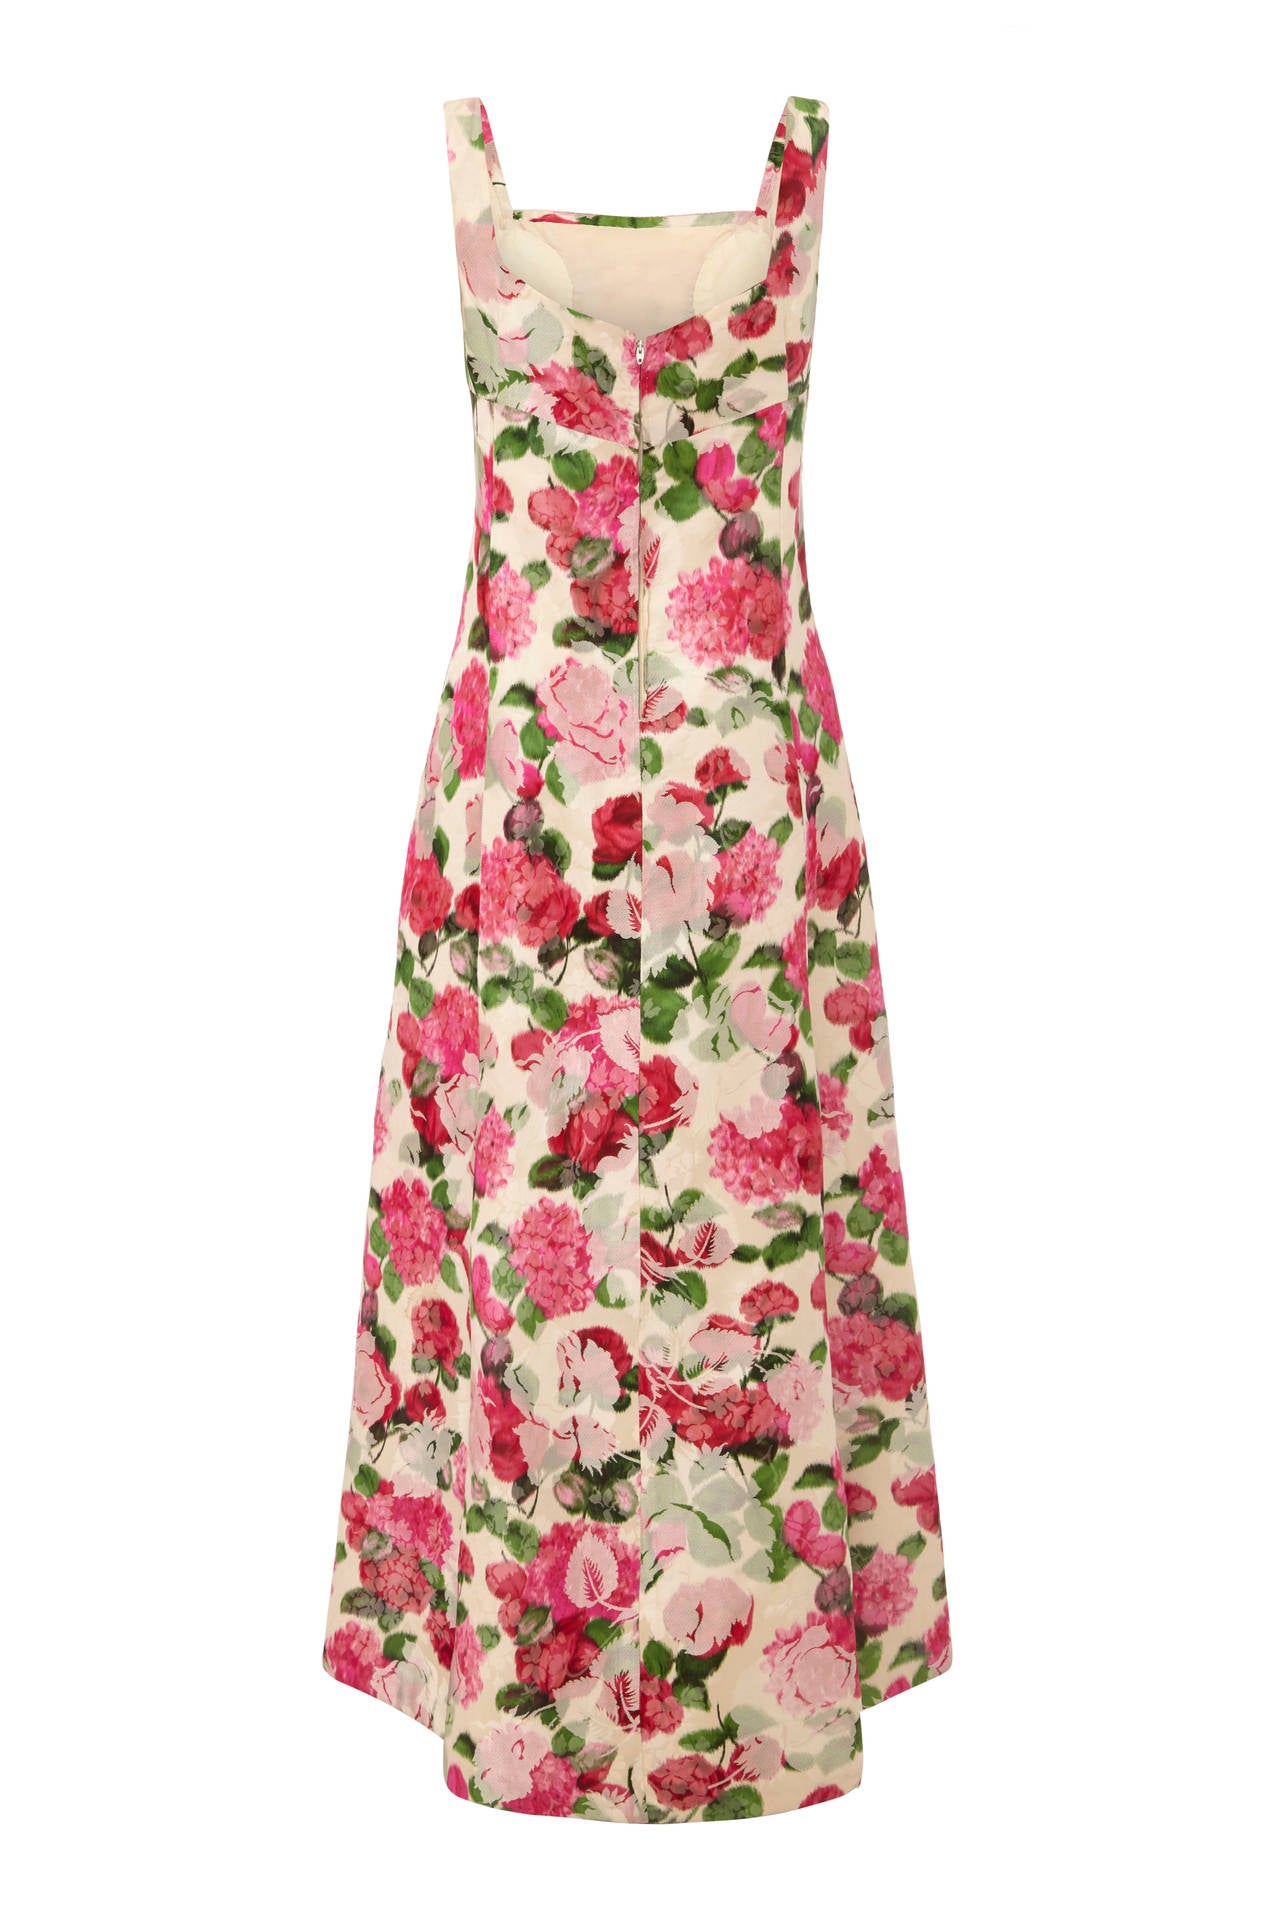 Amazing full length, sleeveless custom gown in beautiful pink, cream and green floral brocade. This piece features an empire line and padding in the bust with netting in the skirt for a bit of extra volume.  It is lined in ivory, fastens at the back